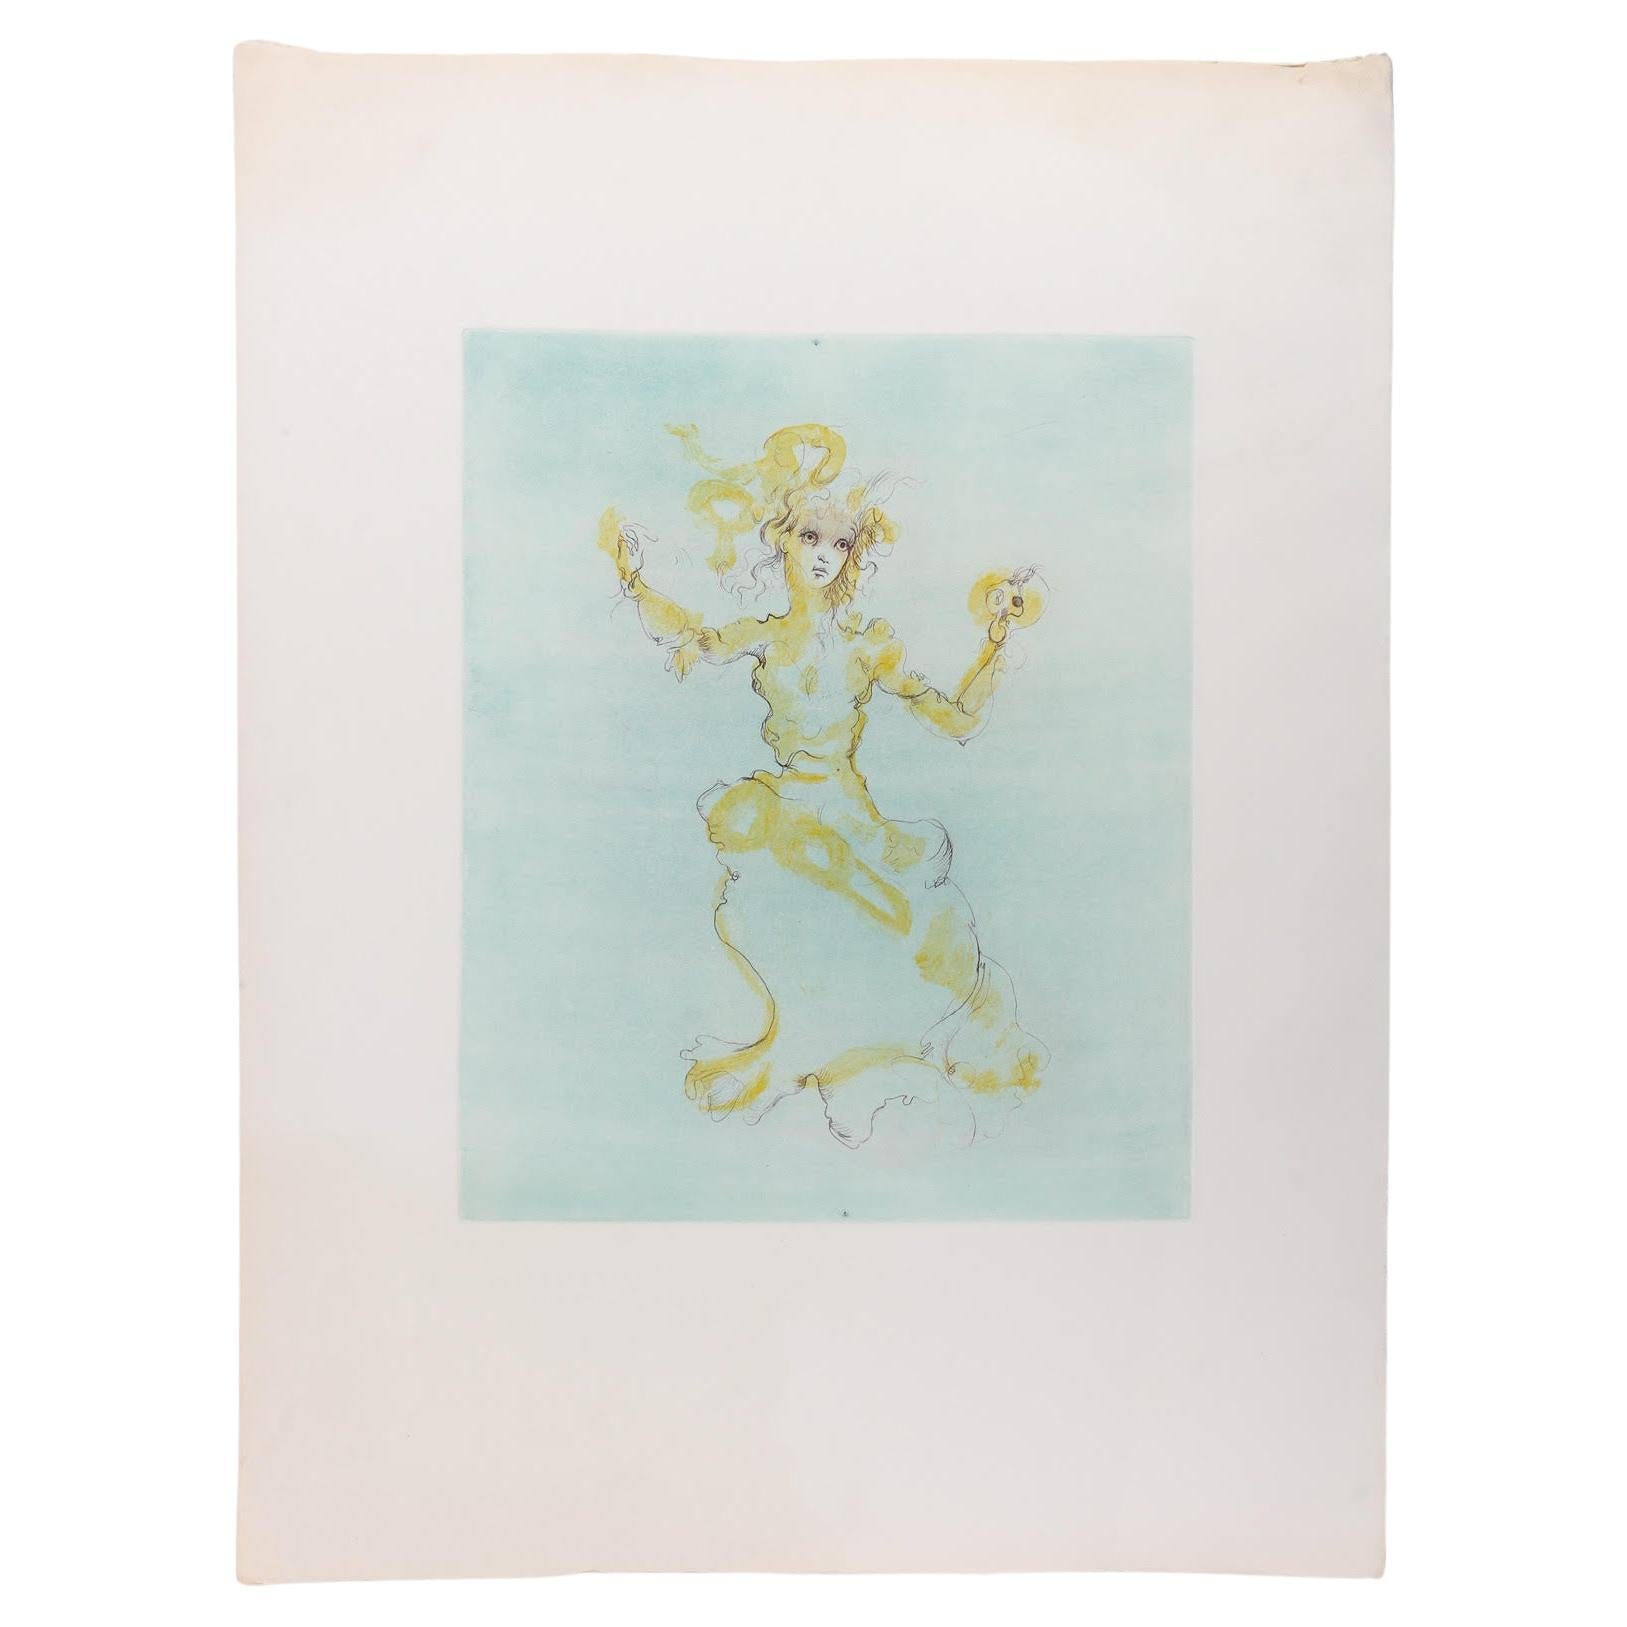 Lithograph by Léonor Fini, XXth Century. For Sale